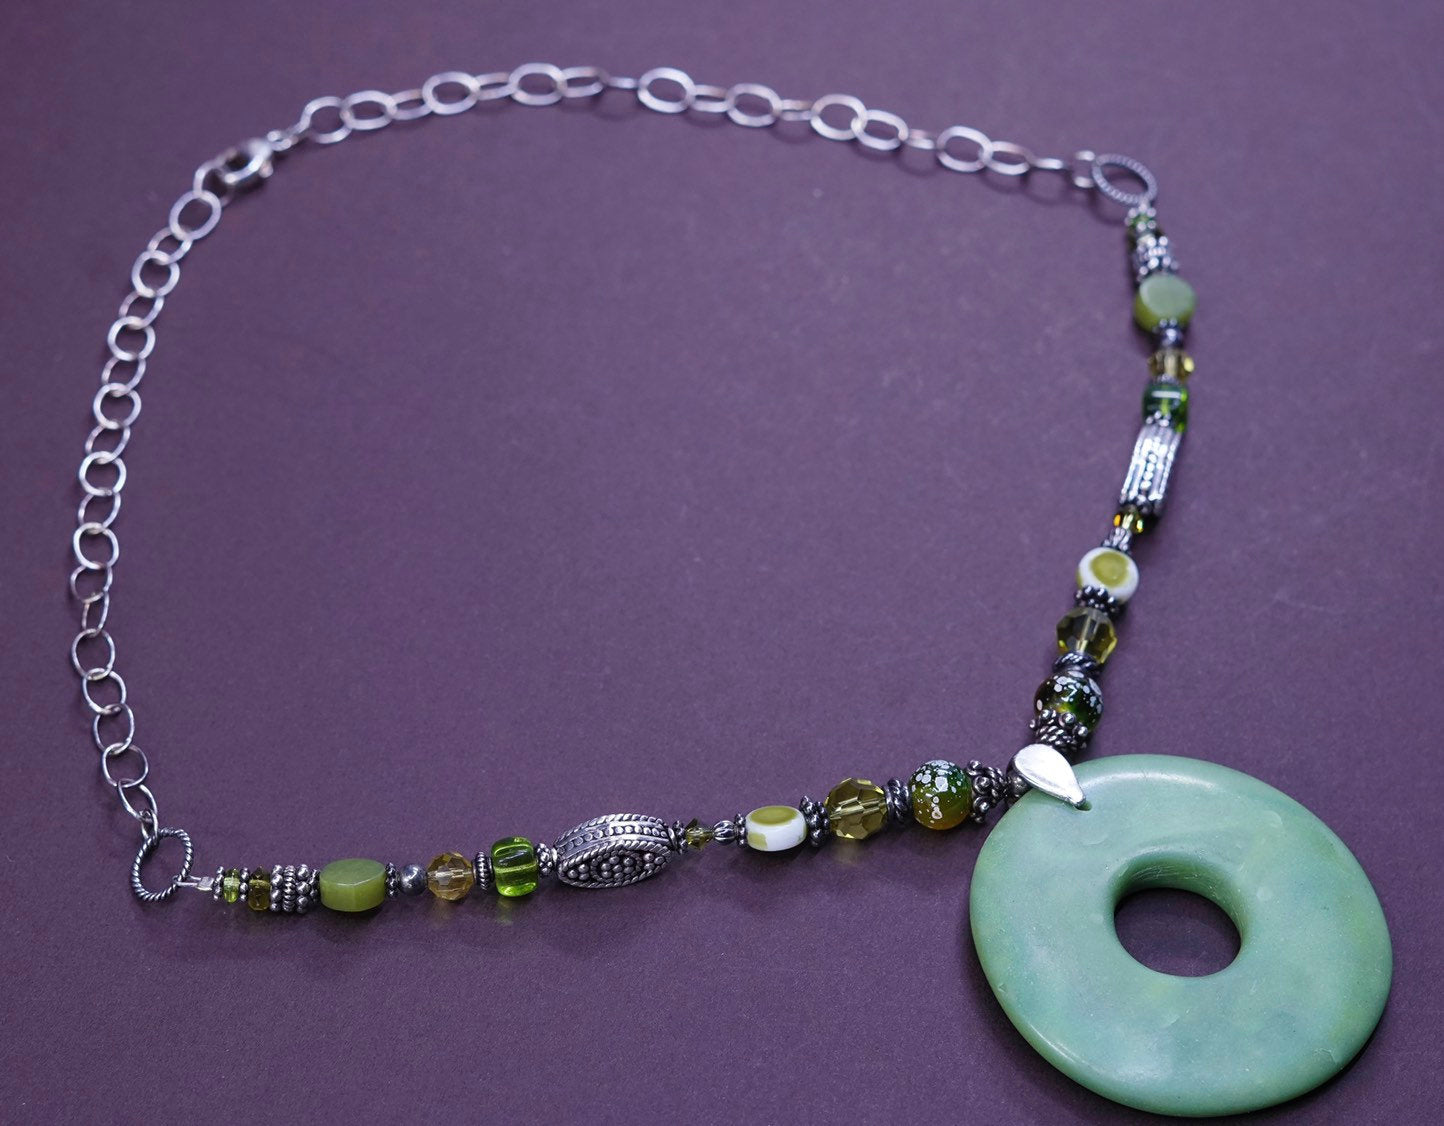 18", Sterling silver beads necklace, circle chain w/ green beads N jade pendant